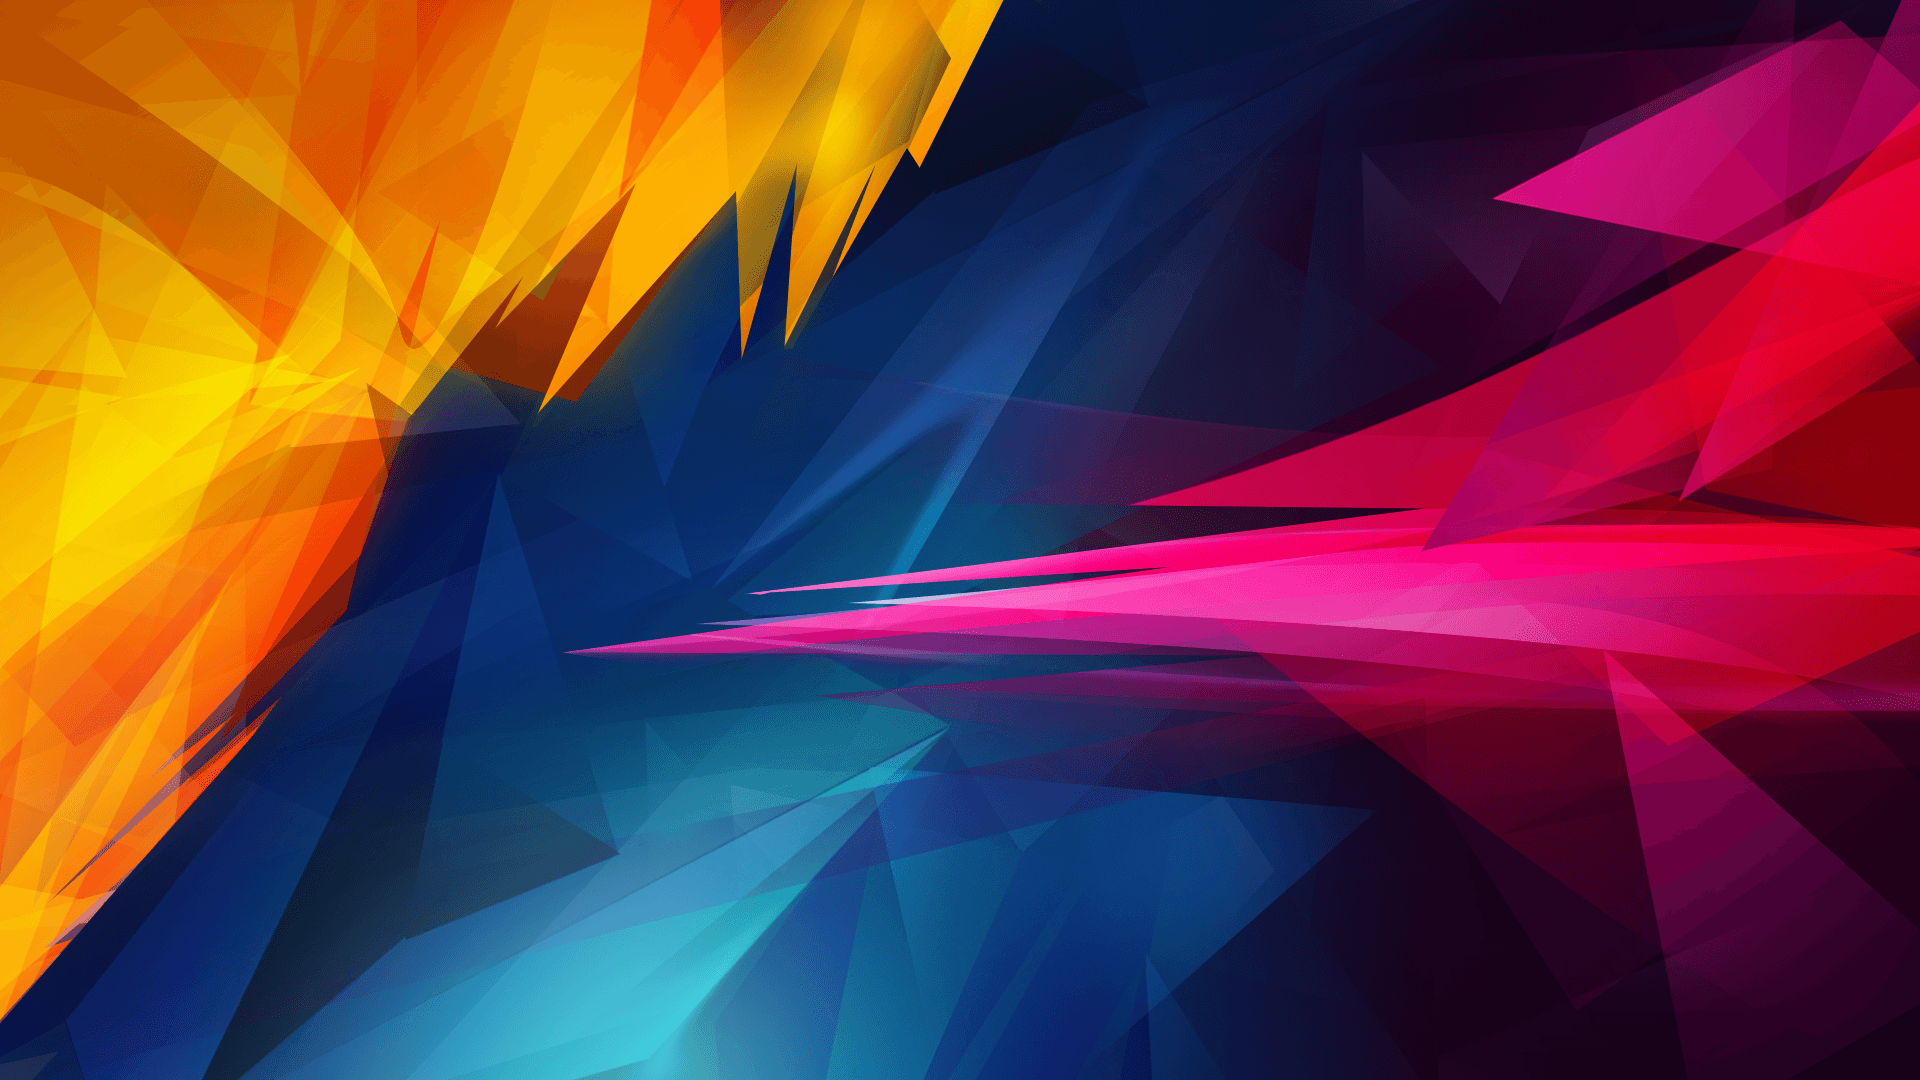 Abstract Wallpaper Images  Free Download on Freepik